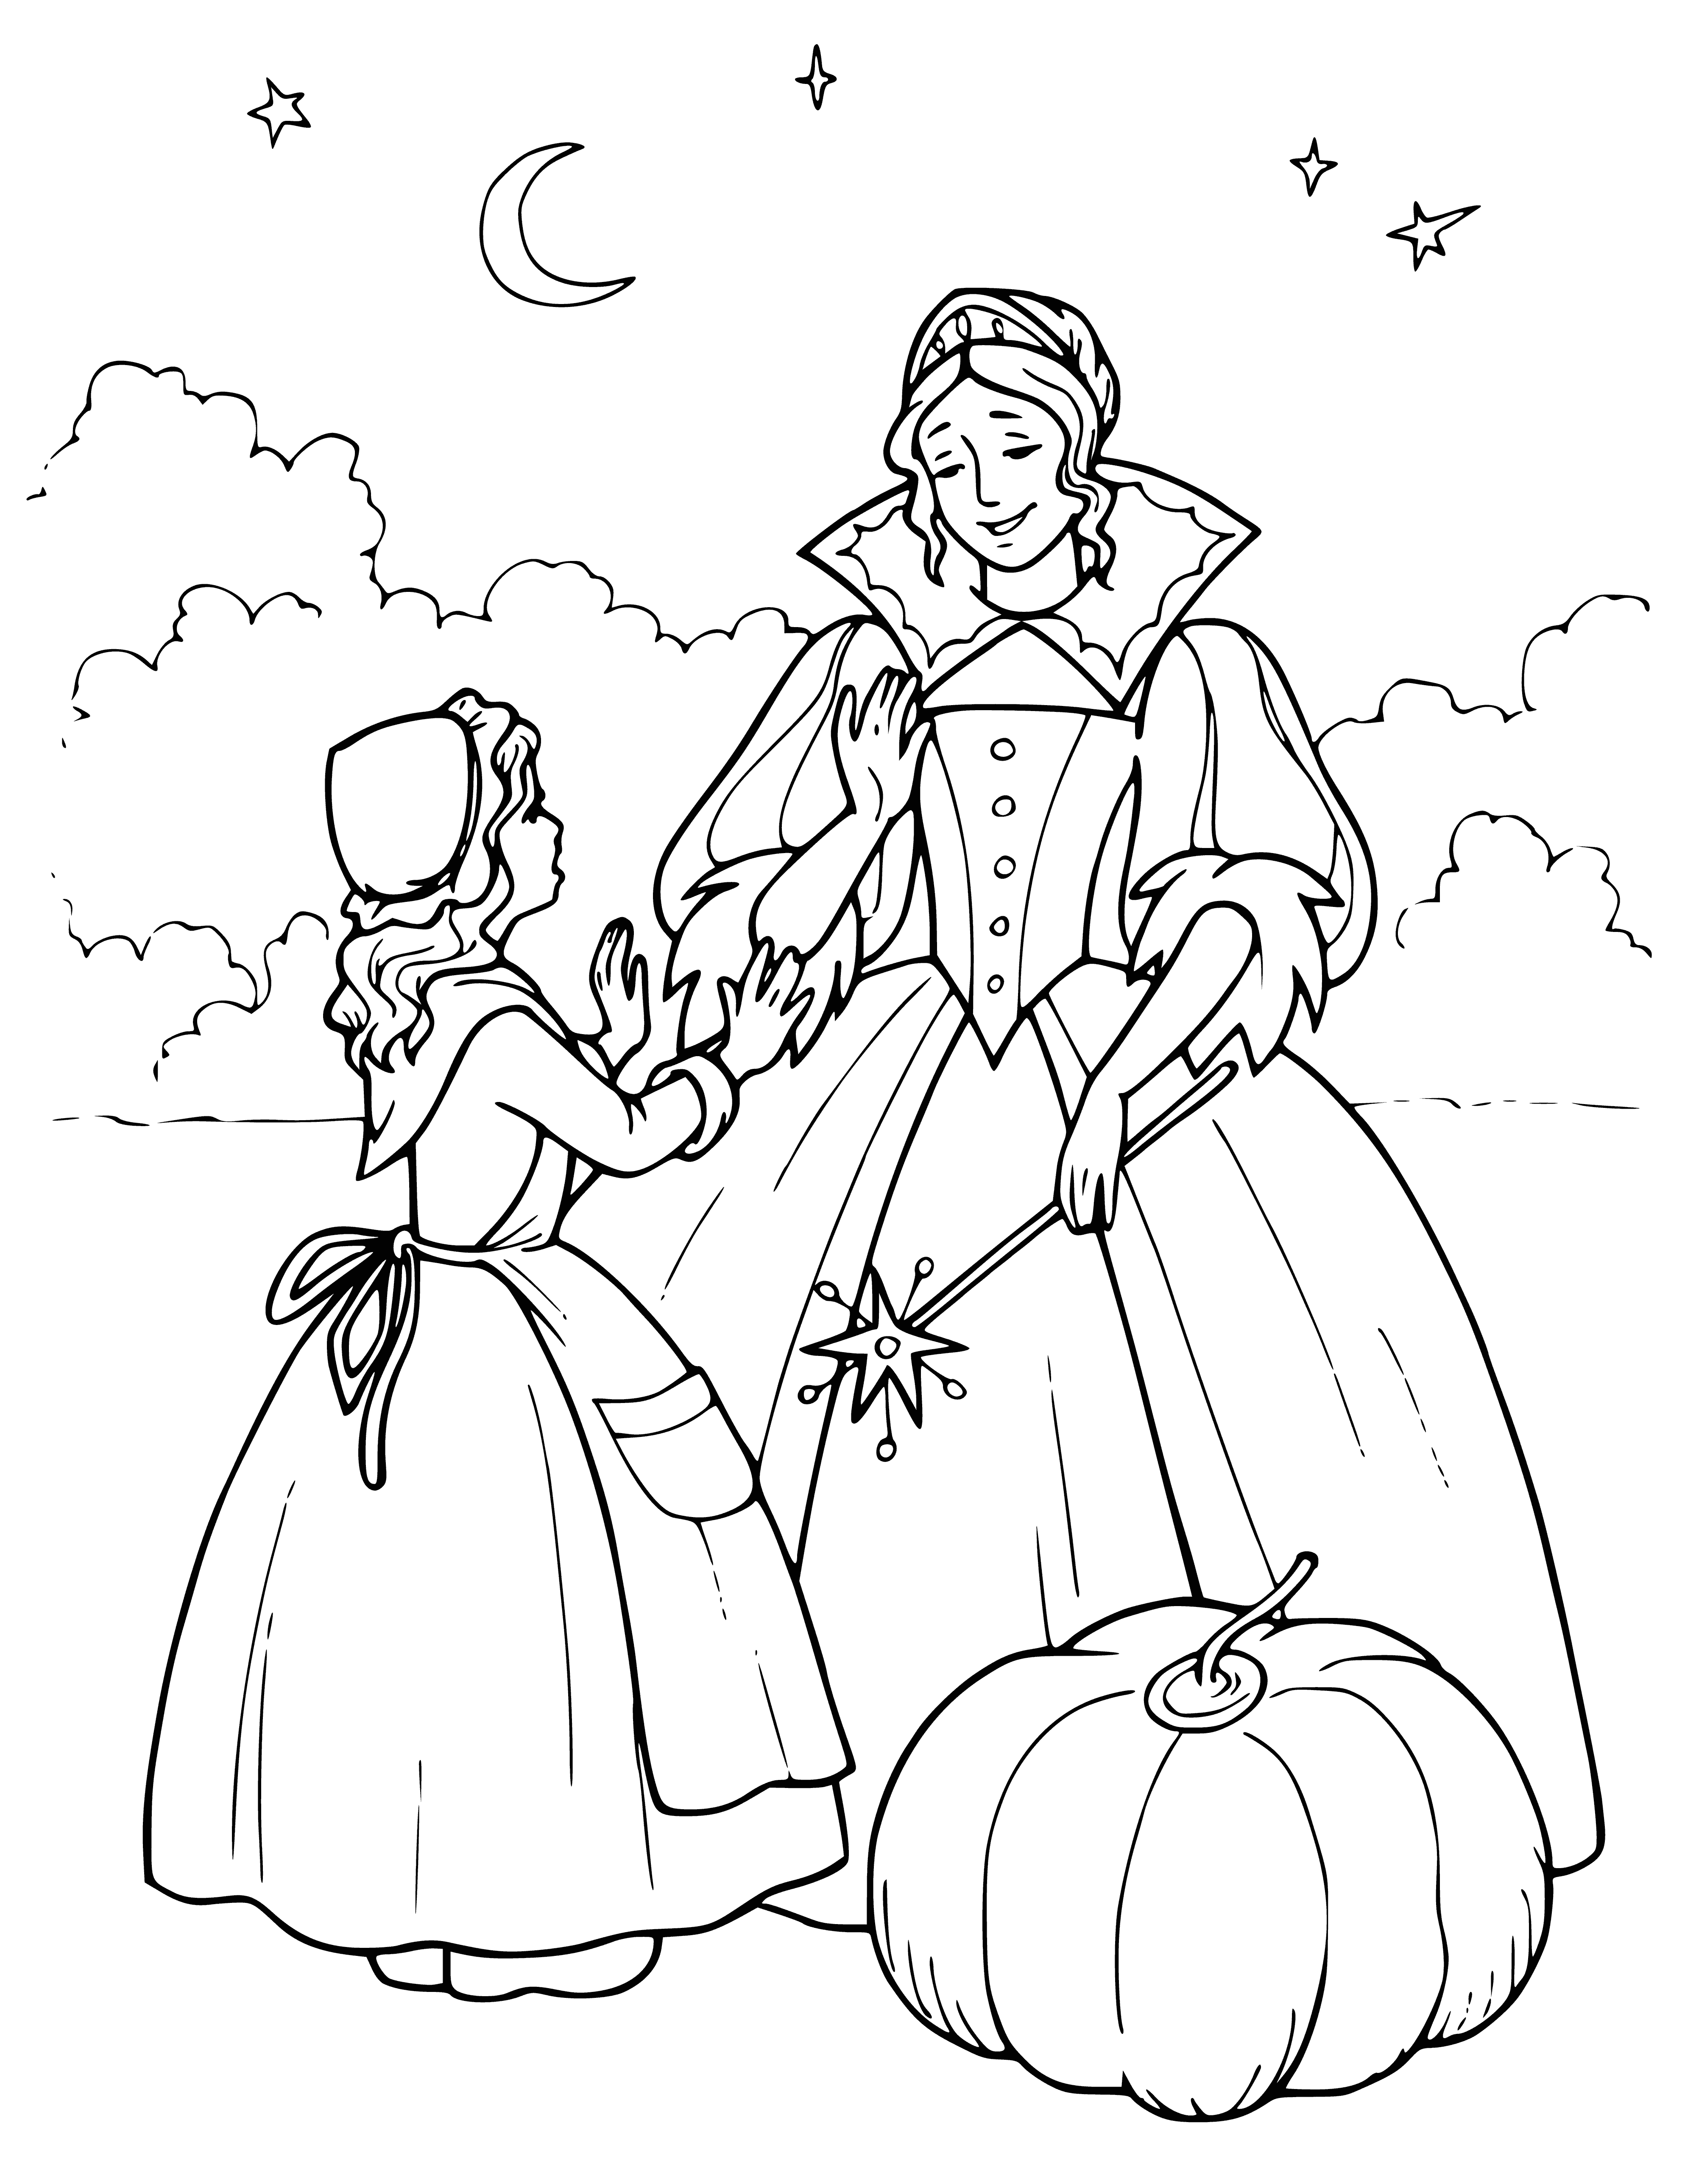 Cinderella and the fairy godmother coloring page